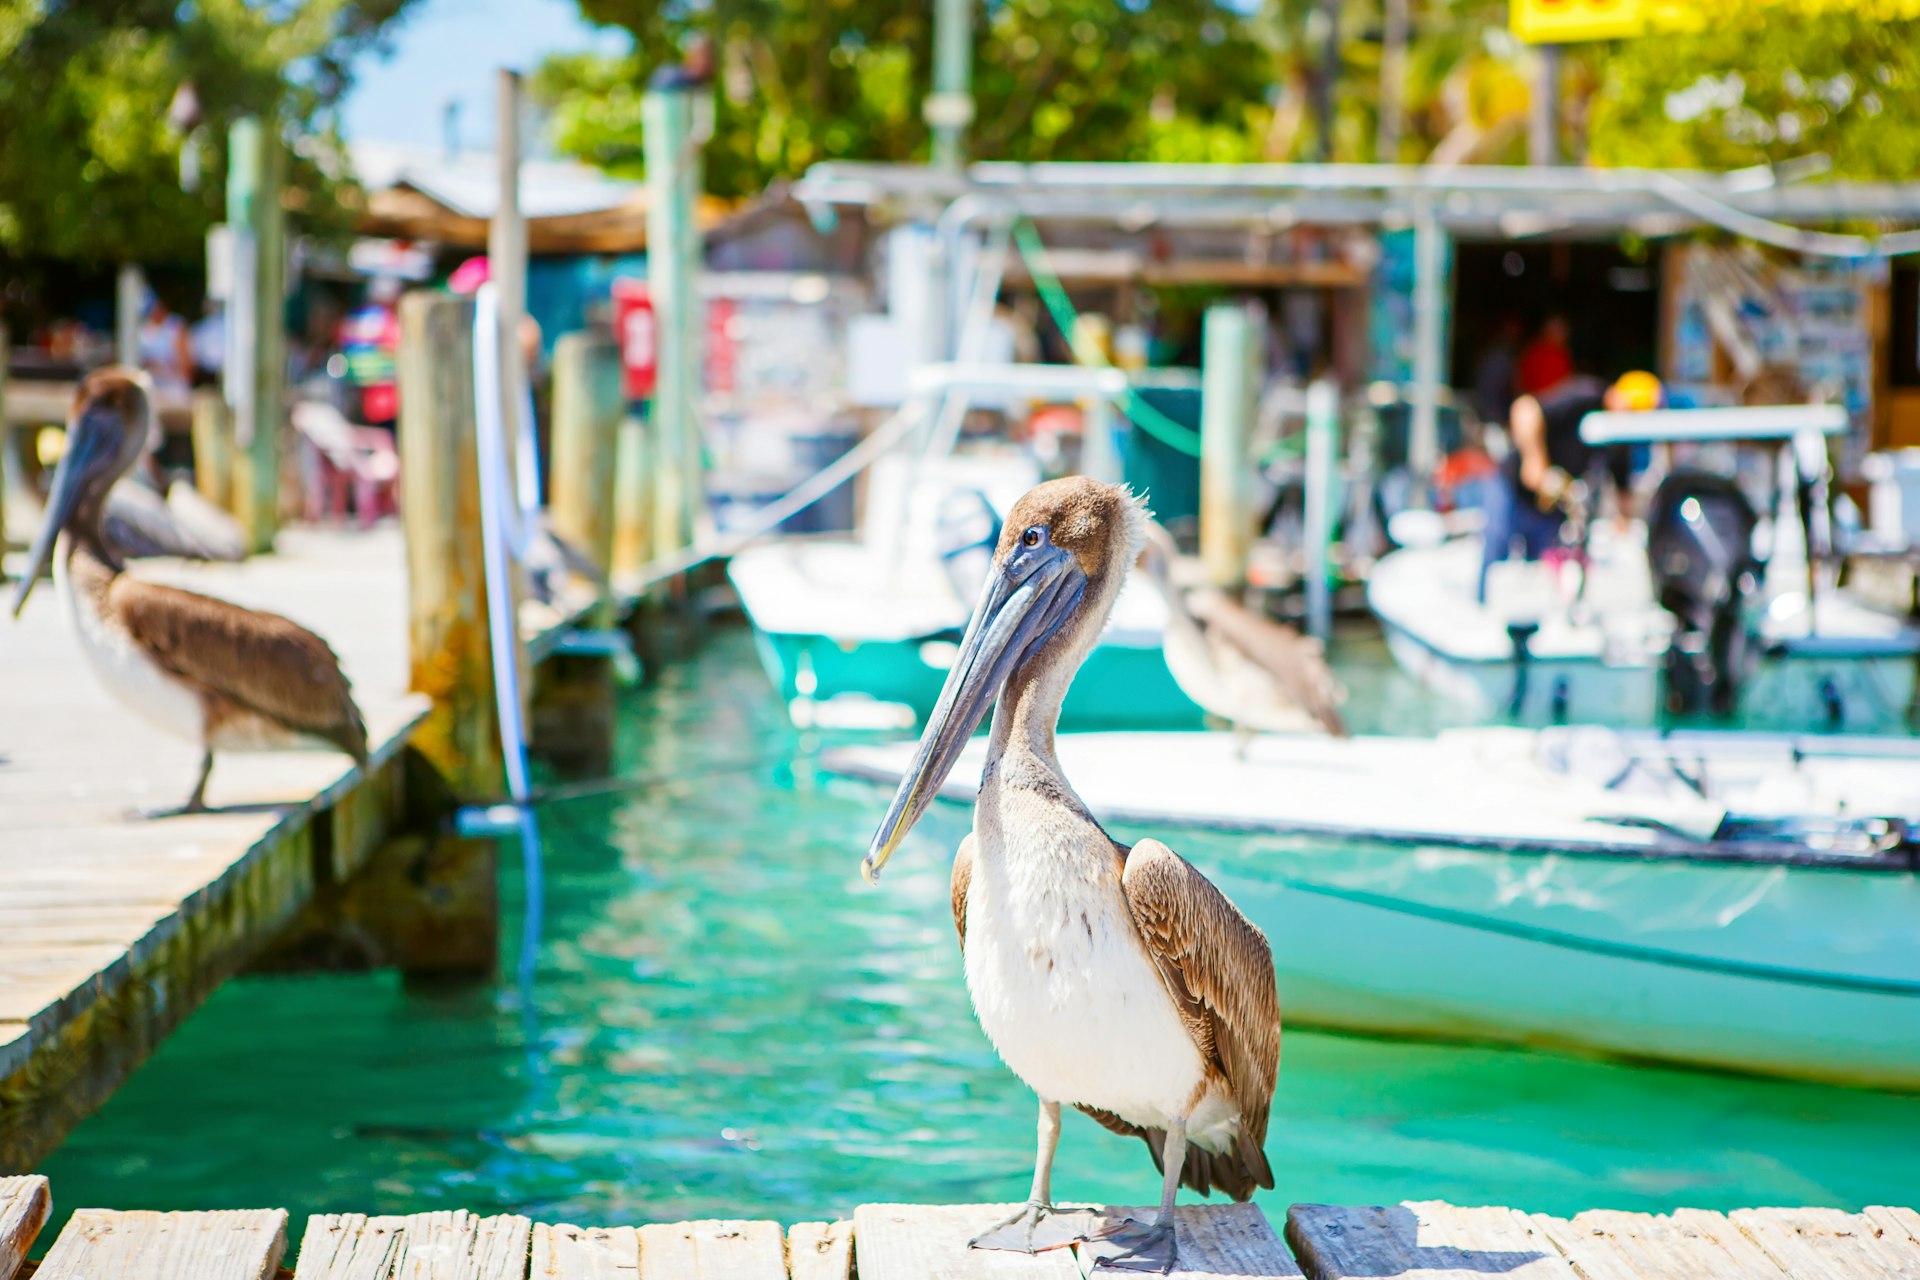 A large brown pelican on a dock